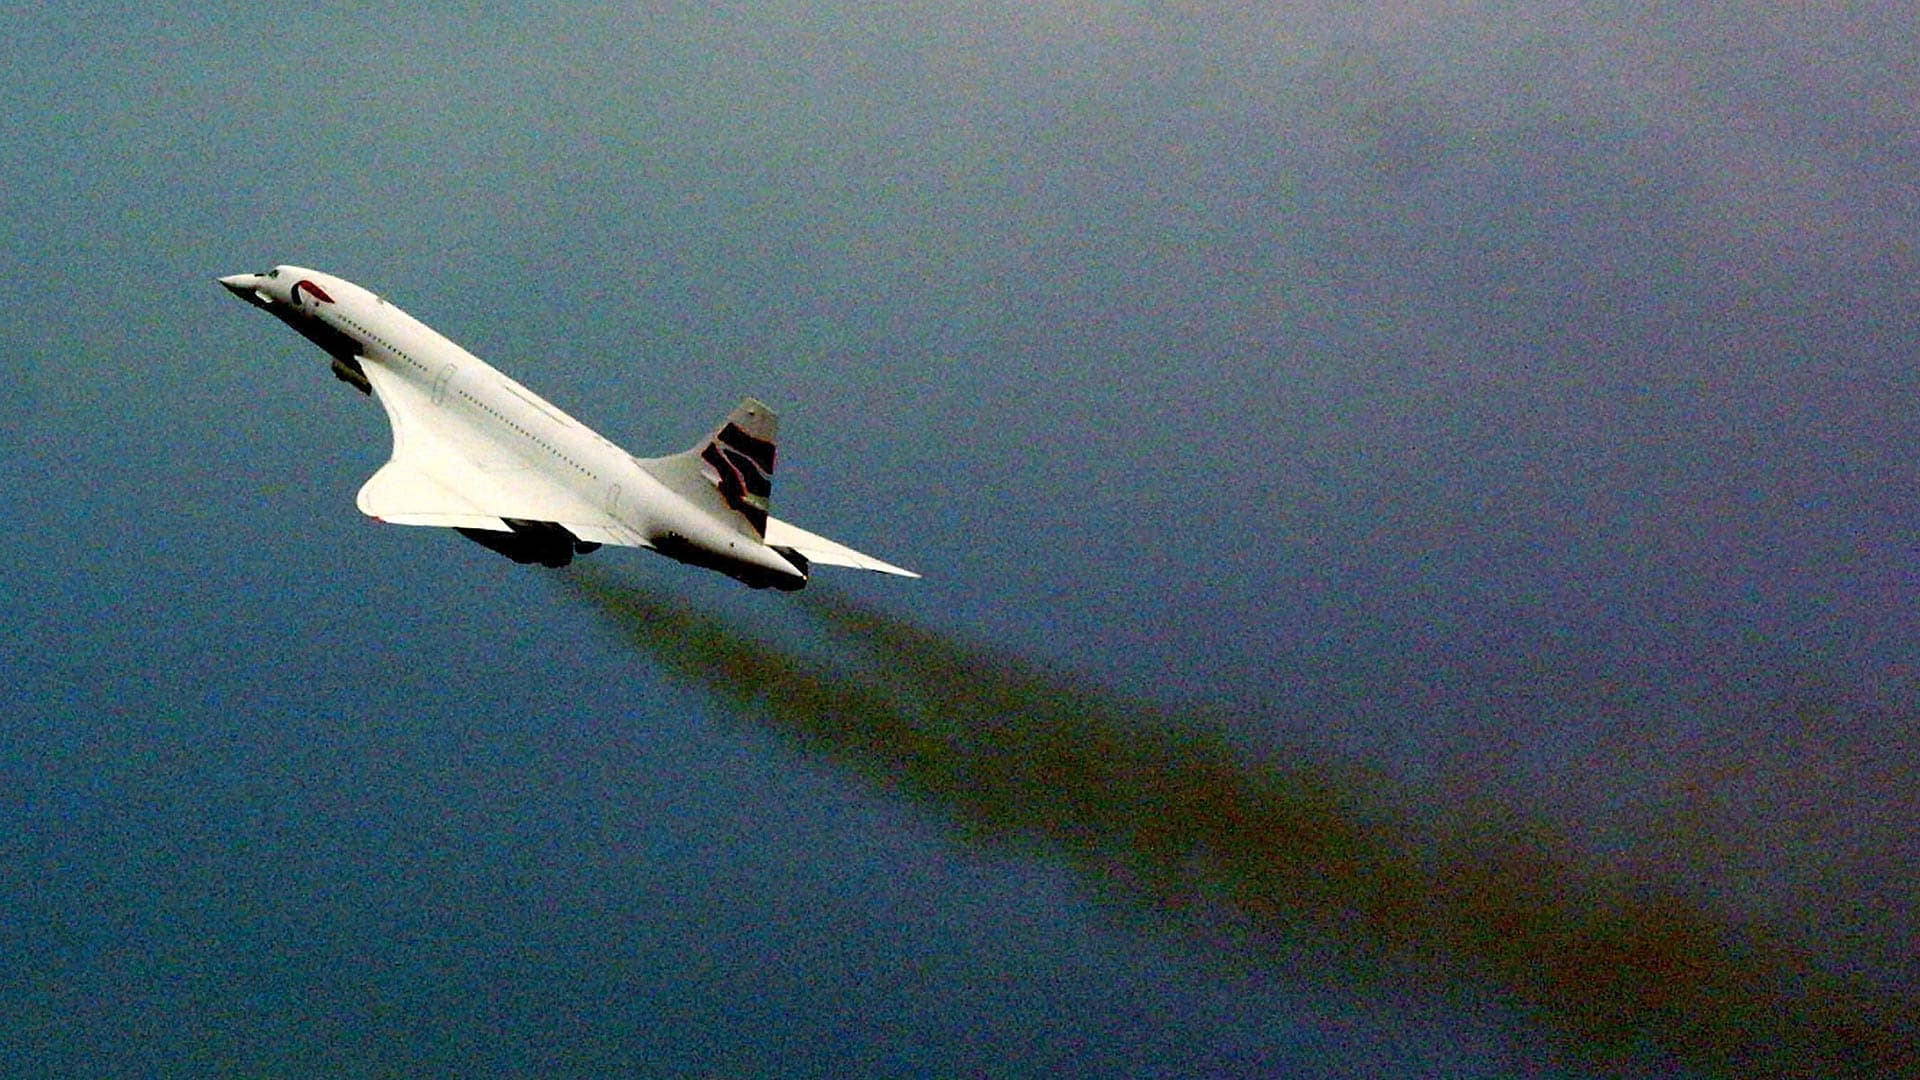 NASA’s Supersonic Flight Mission Is a Fool’s Errand